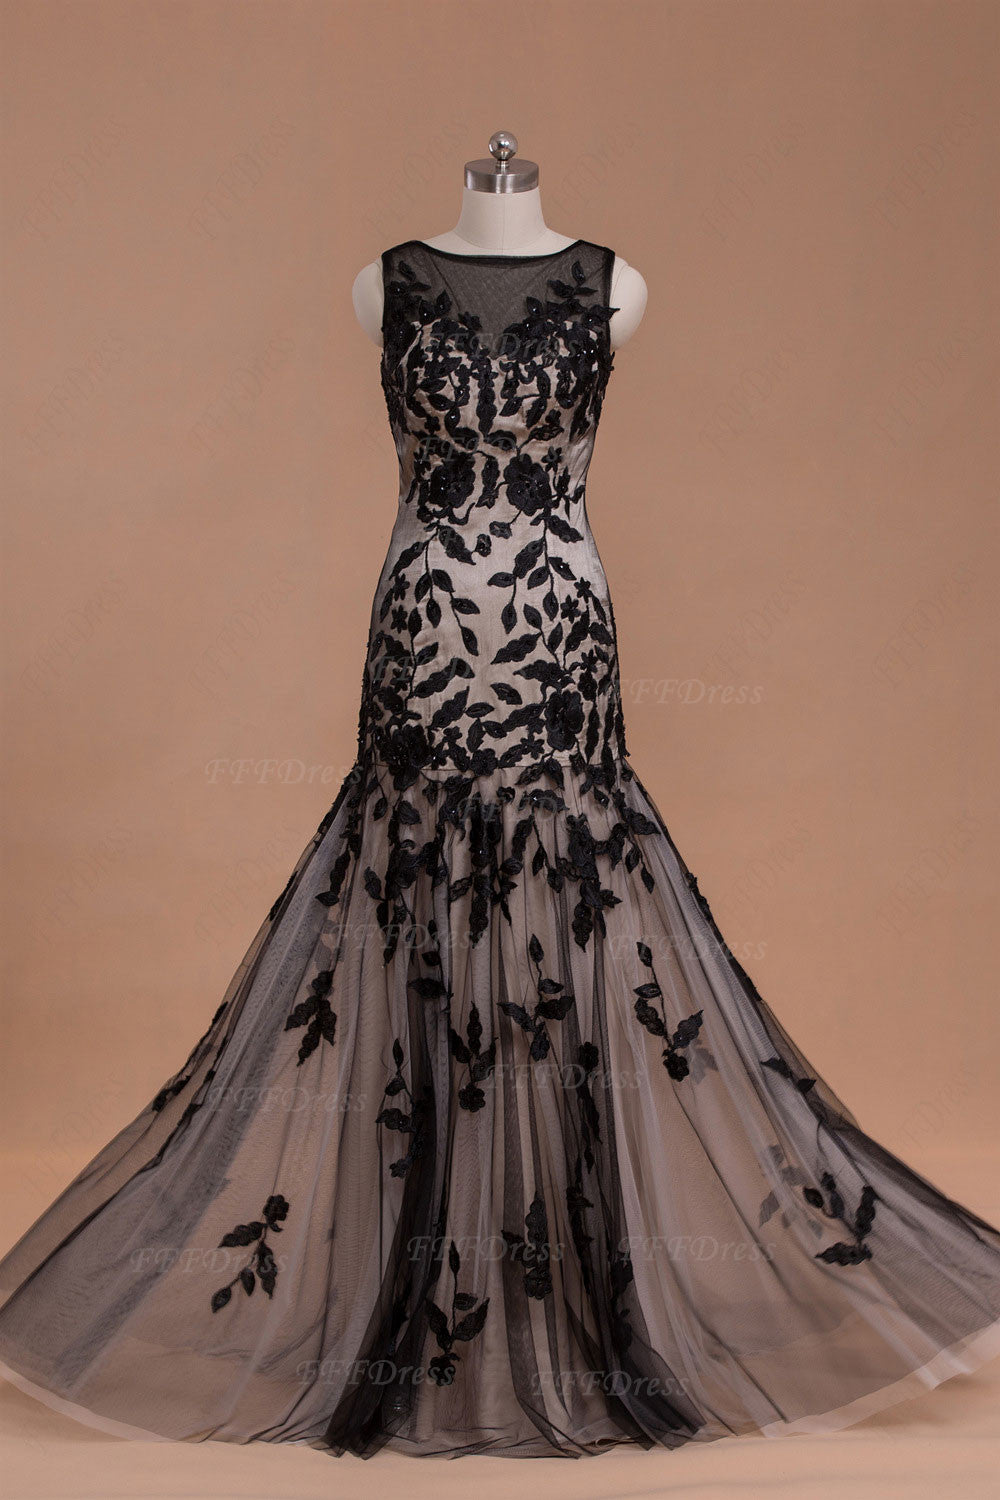 Modest black champagne long prom dress mother of the bride dresses